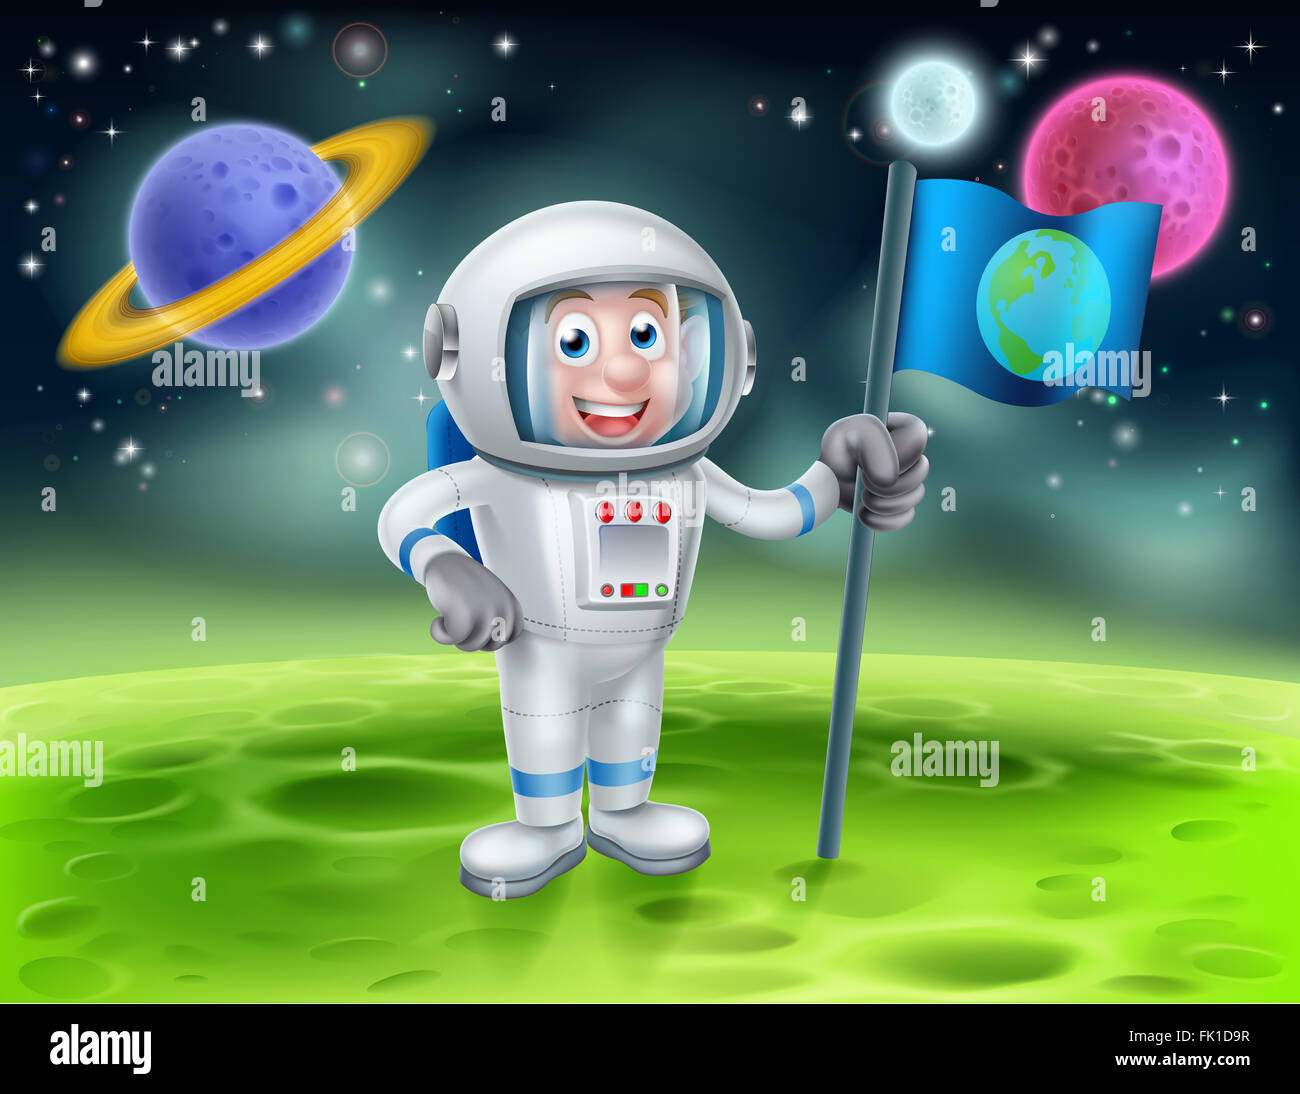 Detail Gambar Planet Planet Astronot Indonesia Nomer 22